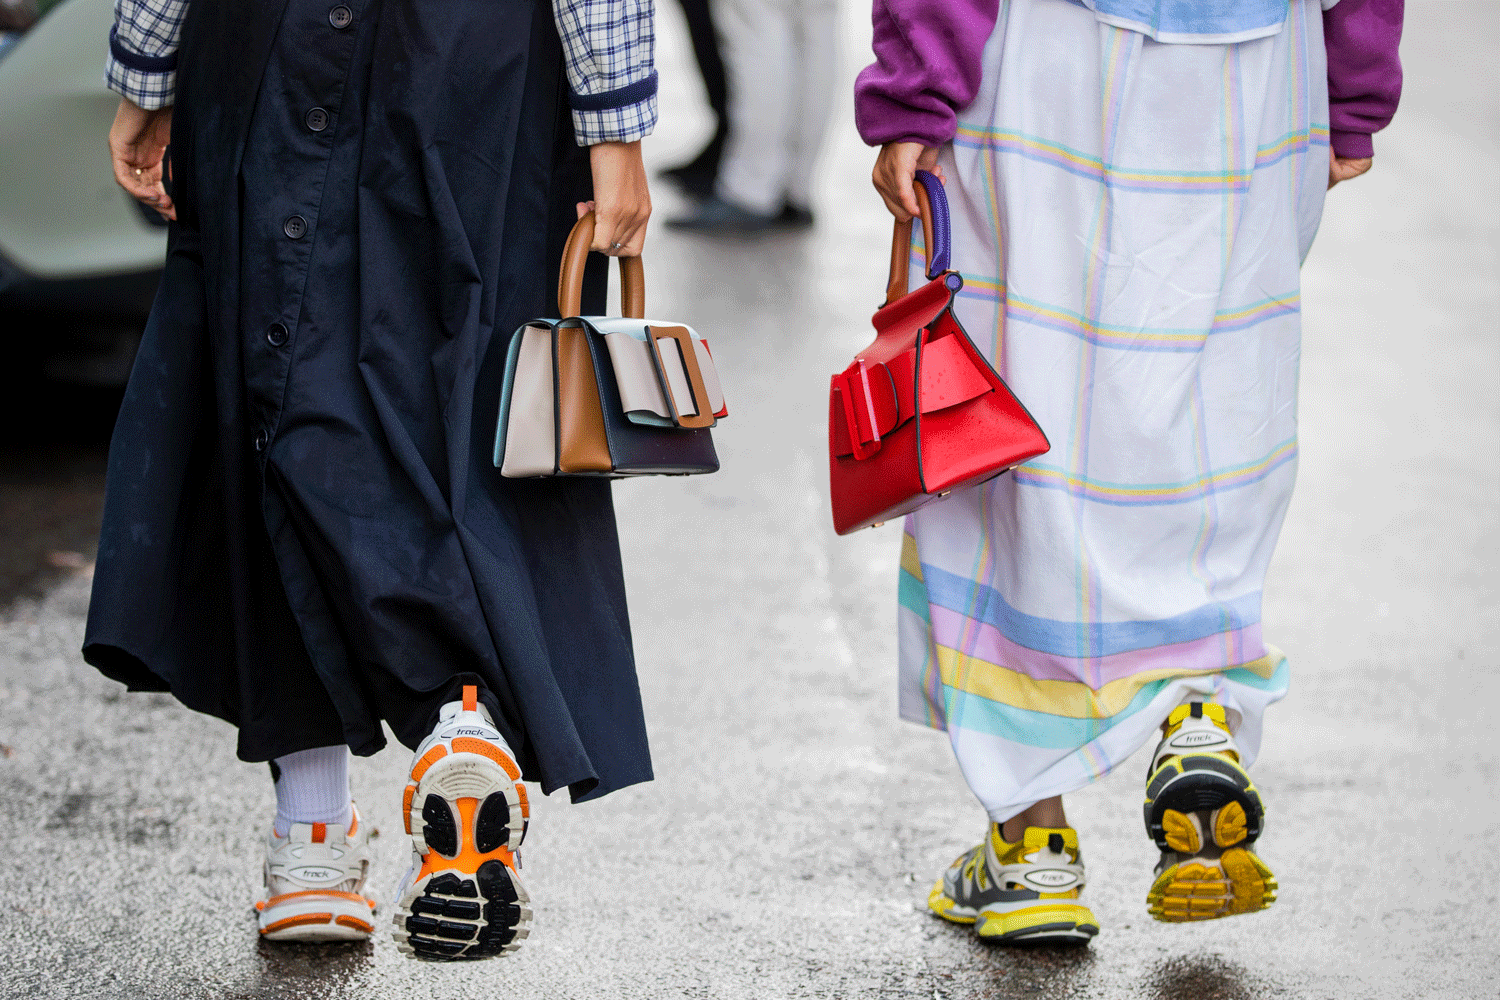 The Most Popular Fashion Brands Of 2019 Have Been Revealed